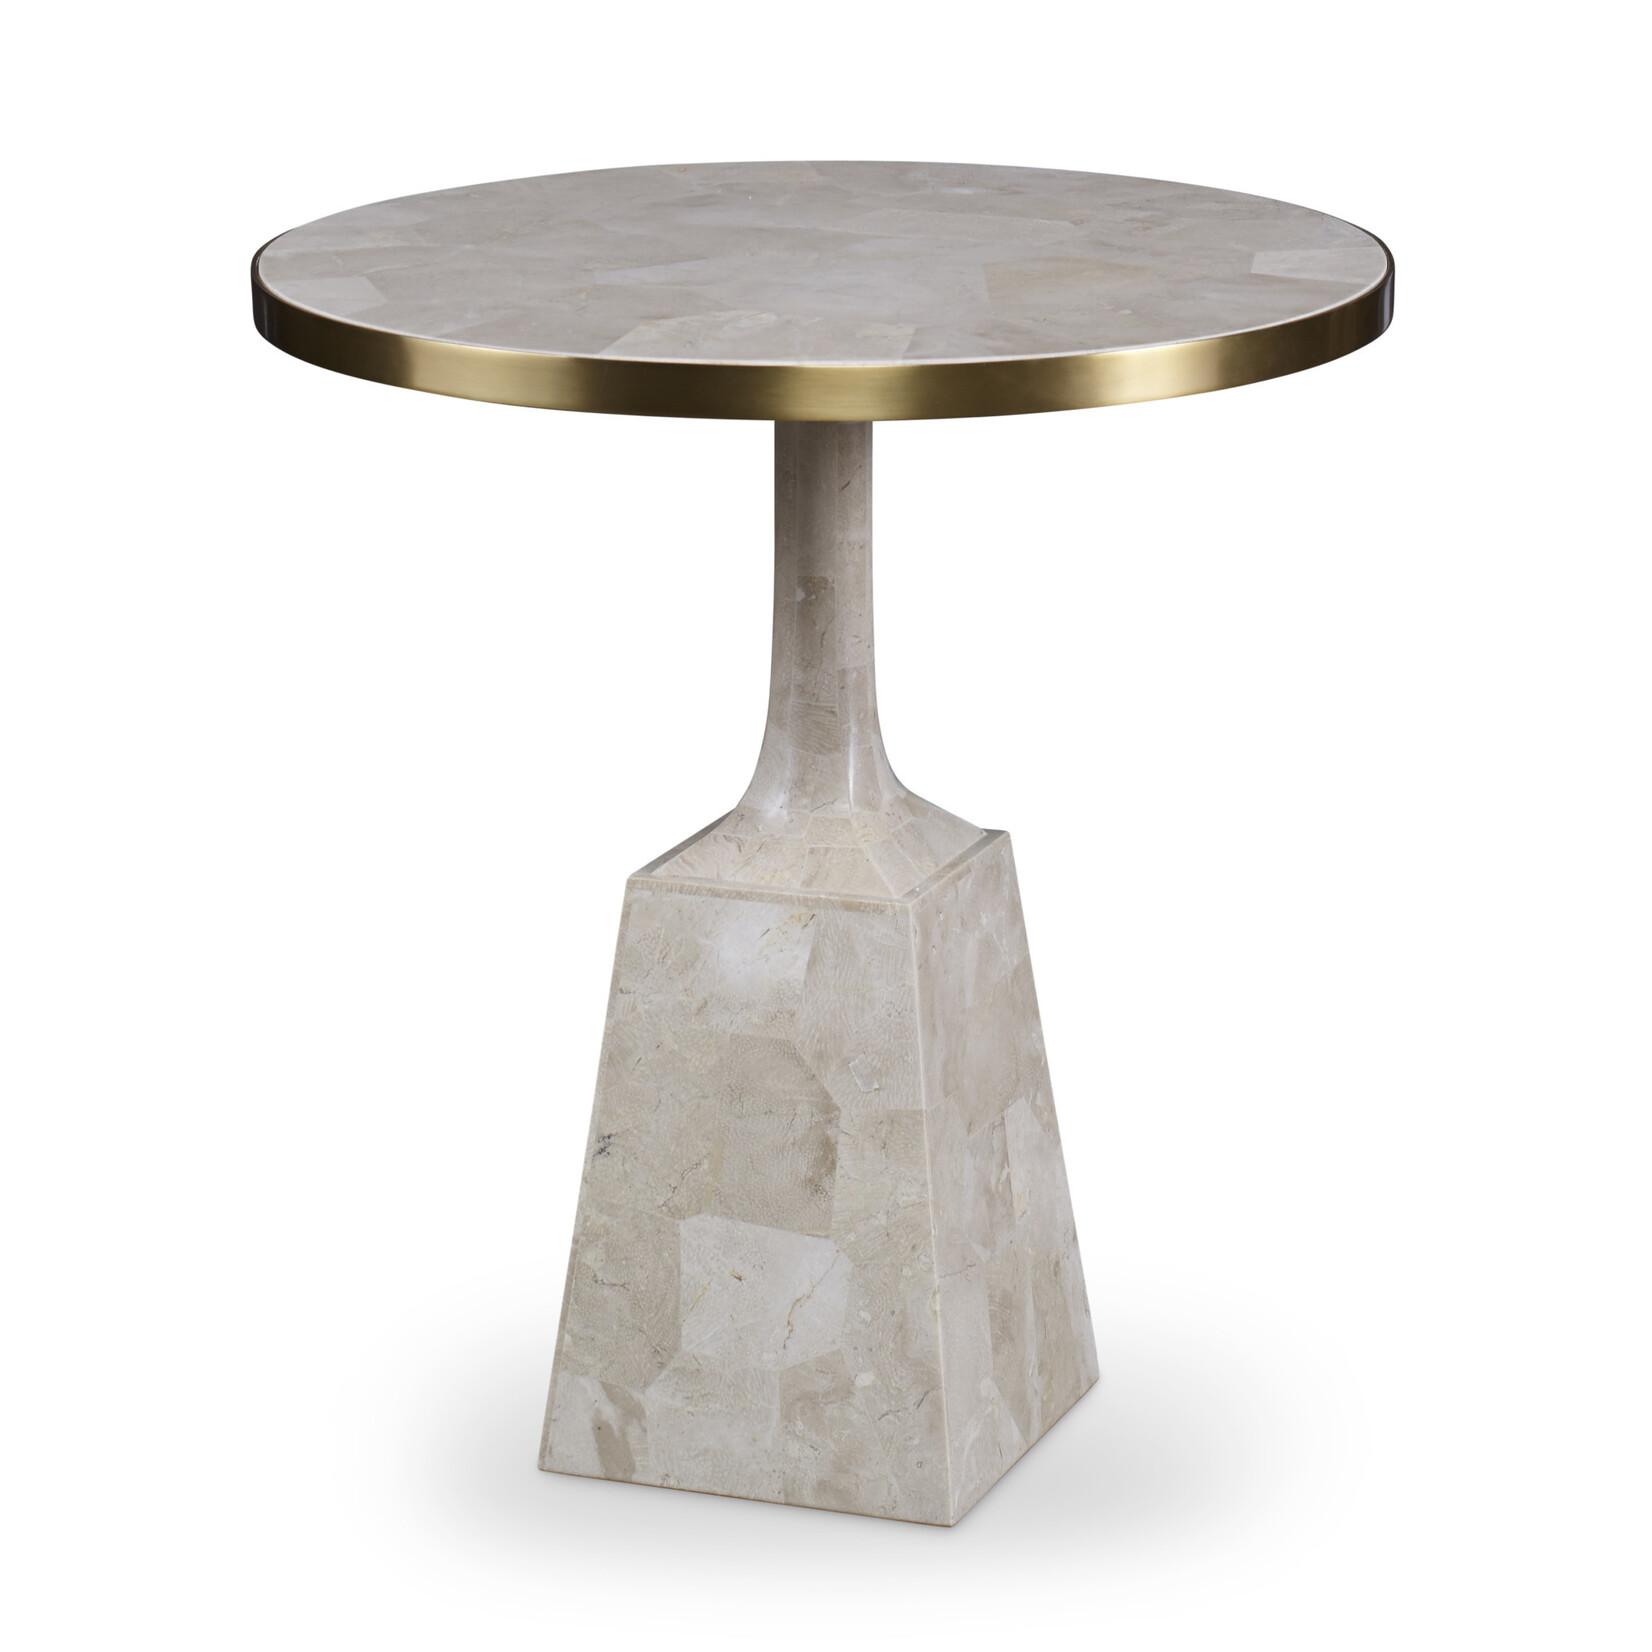 Maitland Smith Stone Pedestal Occasional Table White Fossil Stone Inlaid